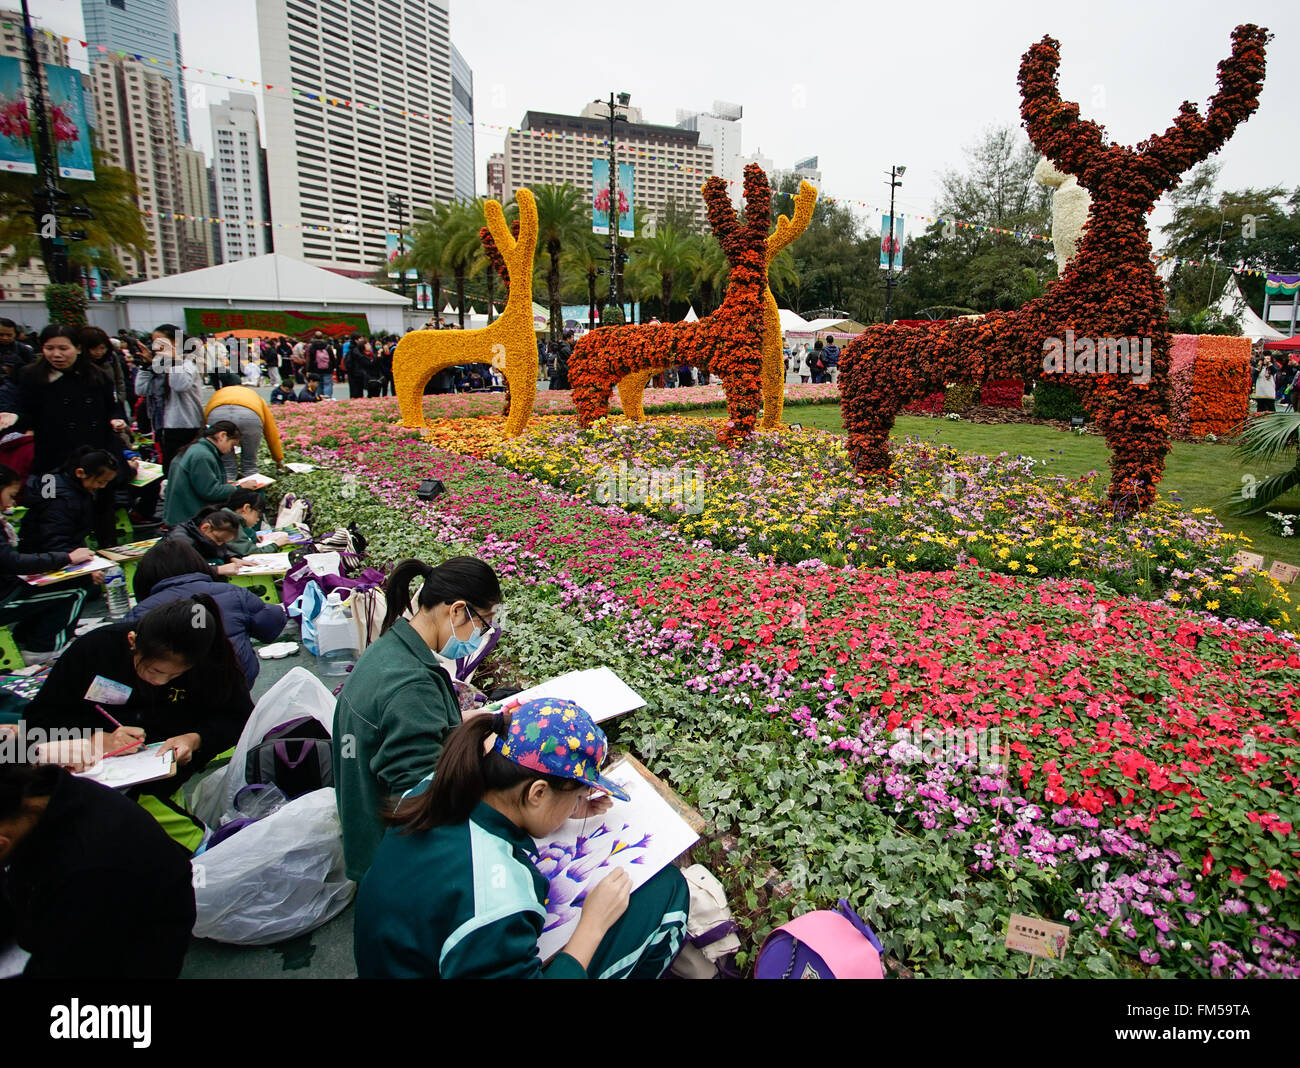 Hong Kong, China. 11th Mar, 2016. Visitors draw pictures of flowers during the Hong Kong Flower Exhibition at the Victoria Park in Hong Kong, south China, March 11, 2016. © Ng Wing Kin/Xinhua/Alamy Live News Stock Photo